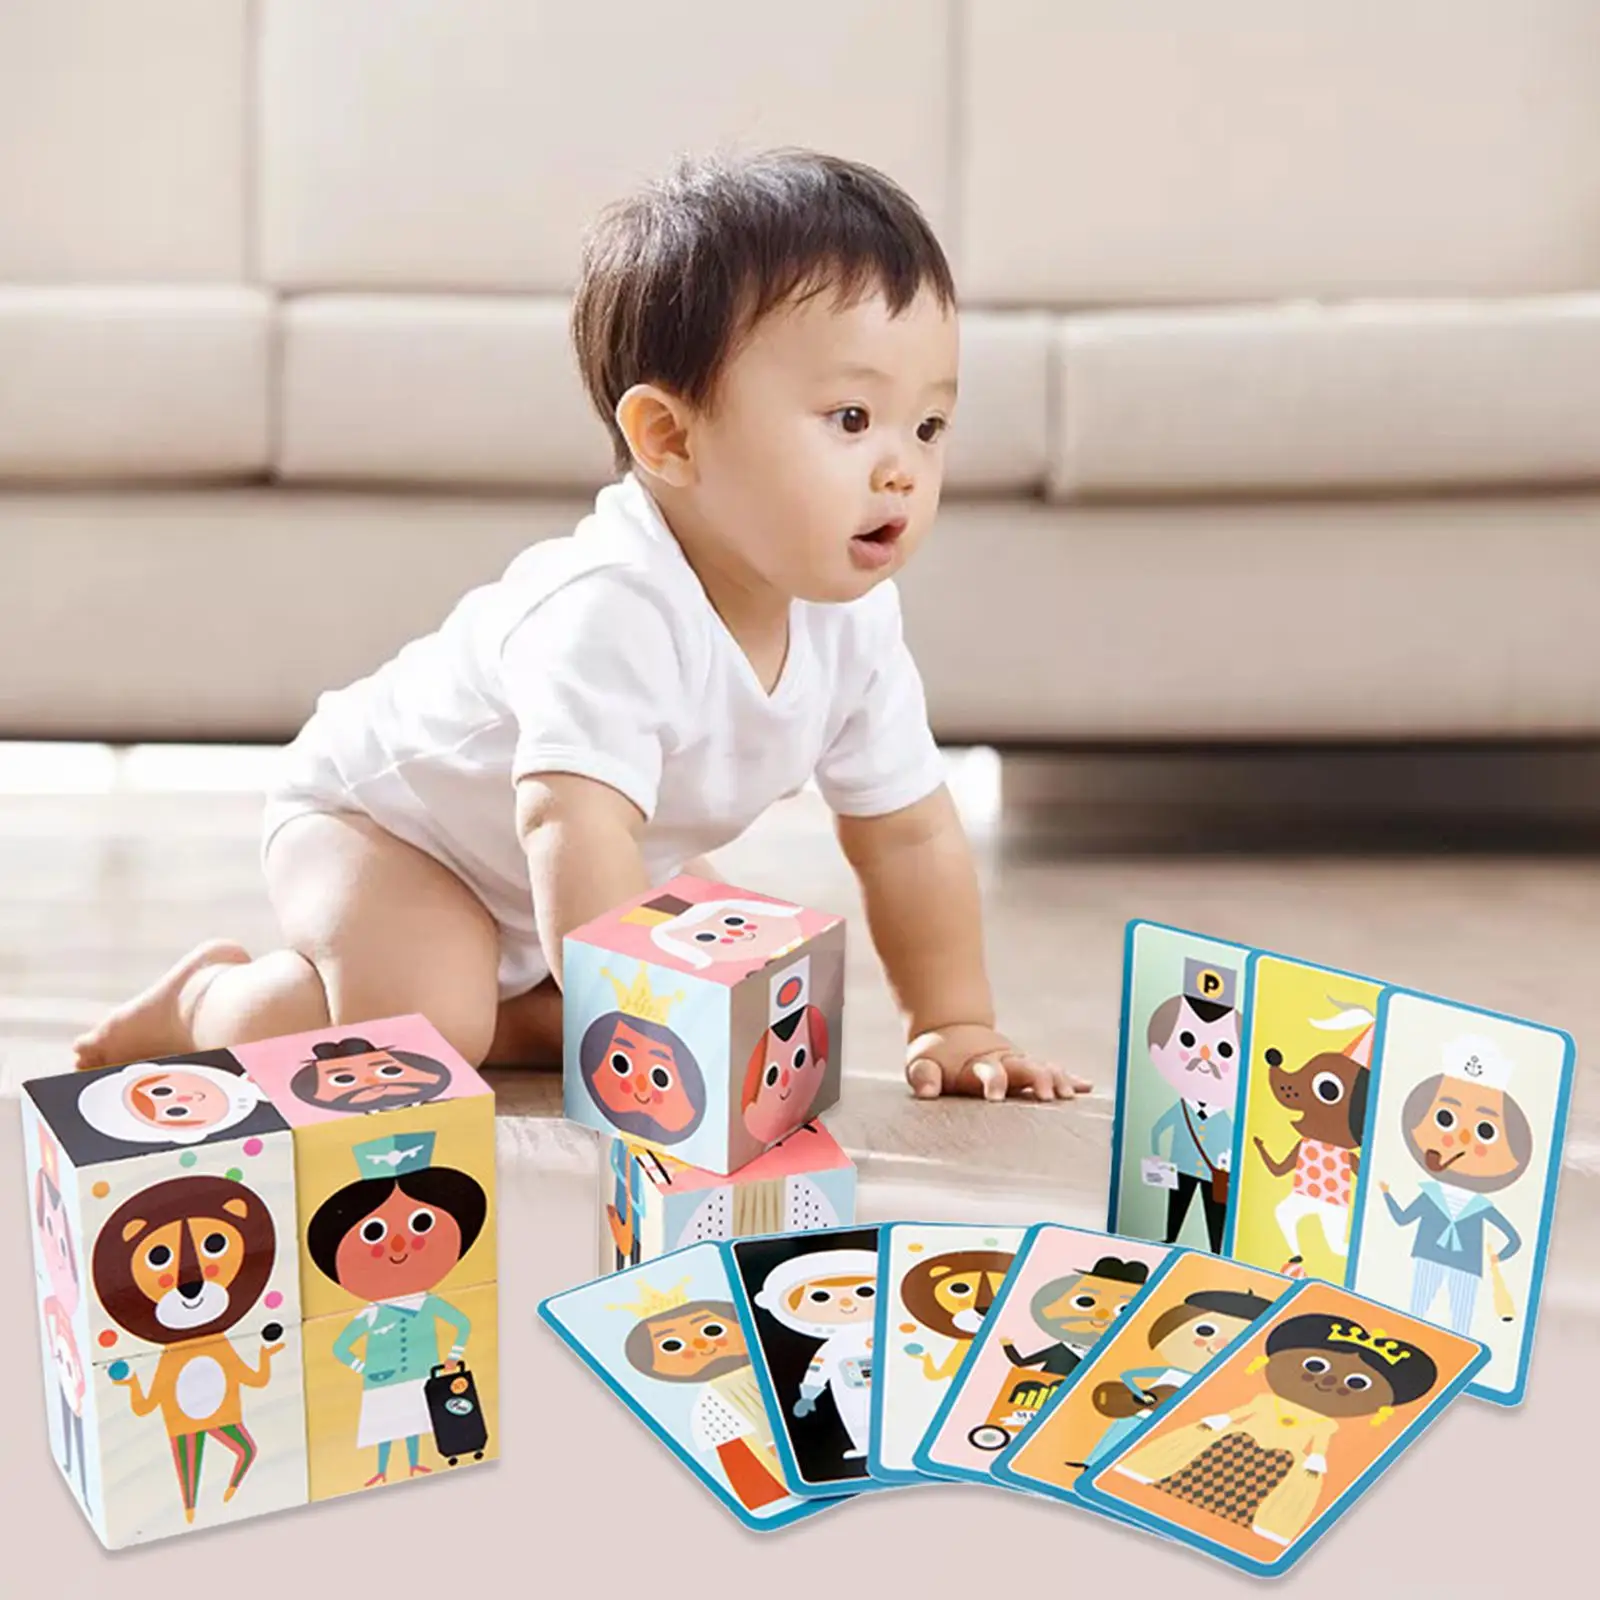 Montessori Toys Logical Thinking Interactive Teaching Material for Children Boys